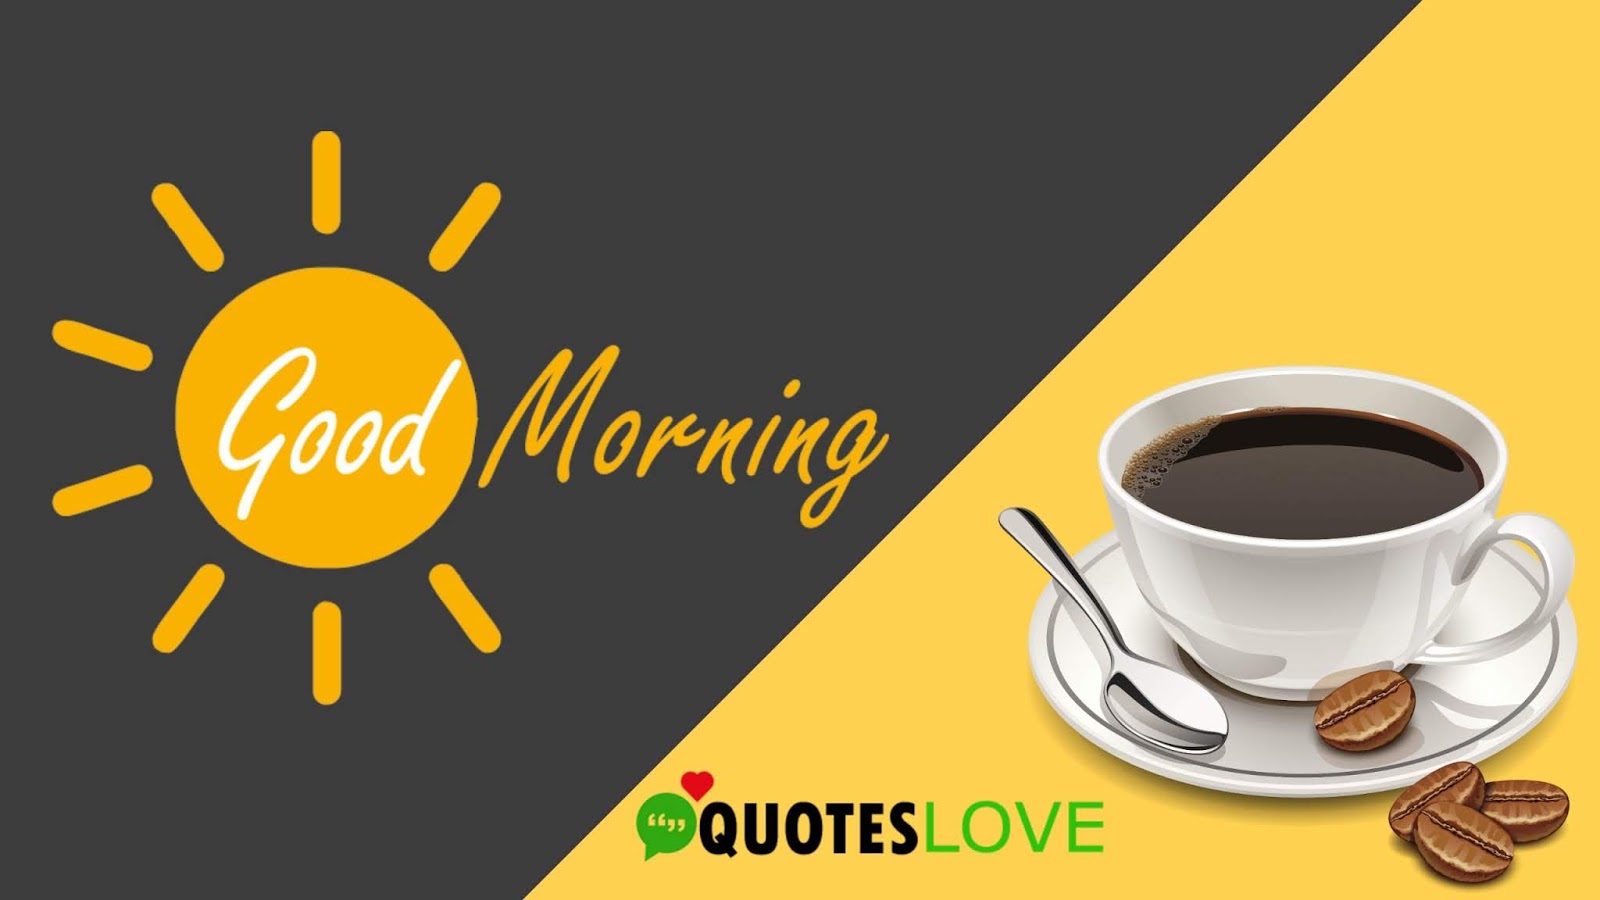 Latest 200+ Good Morning Quotes And Images To Make Your Day Beautiful